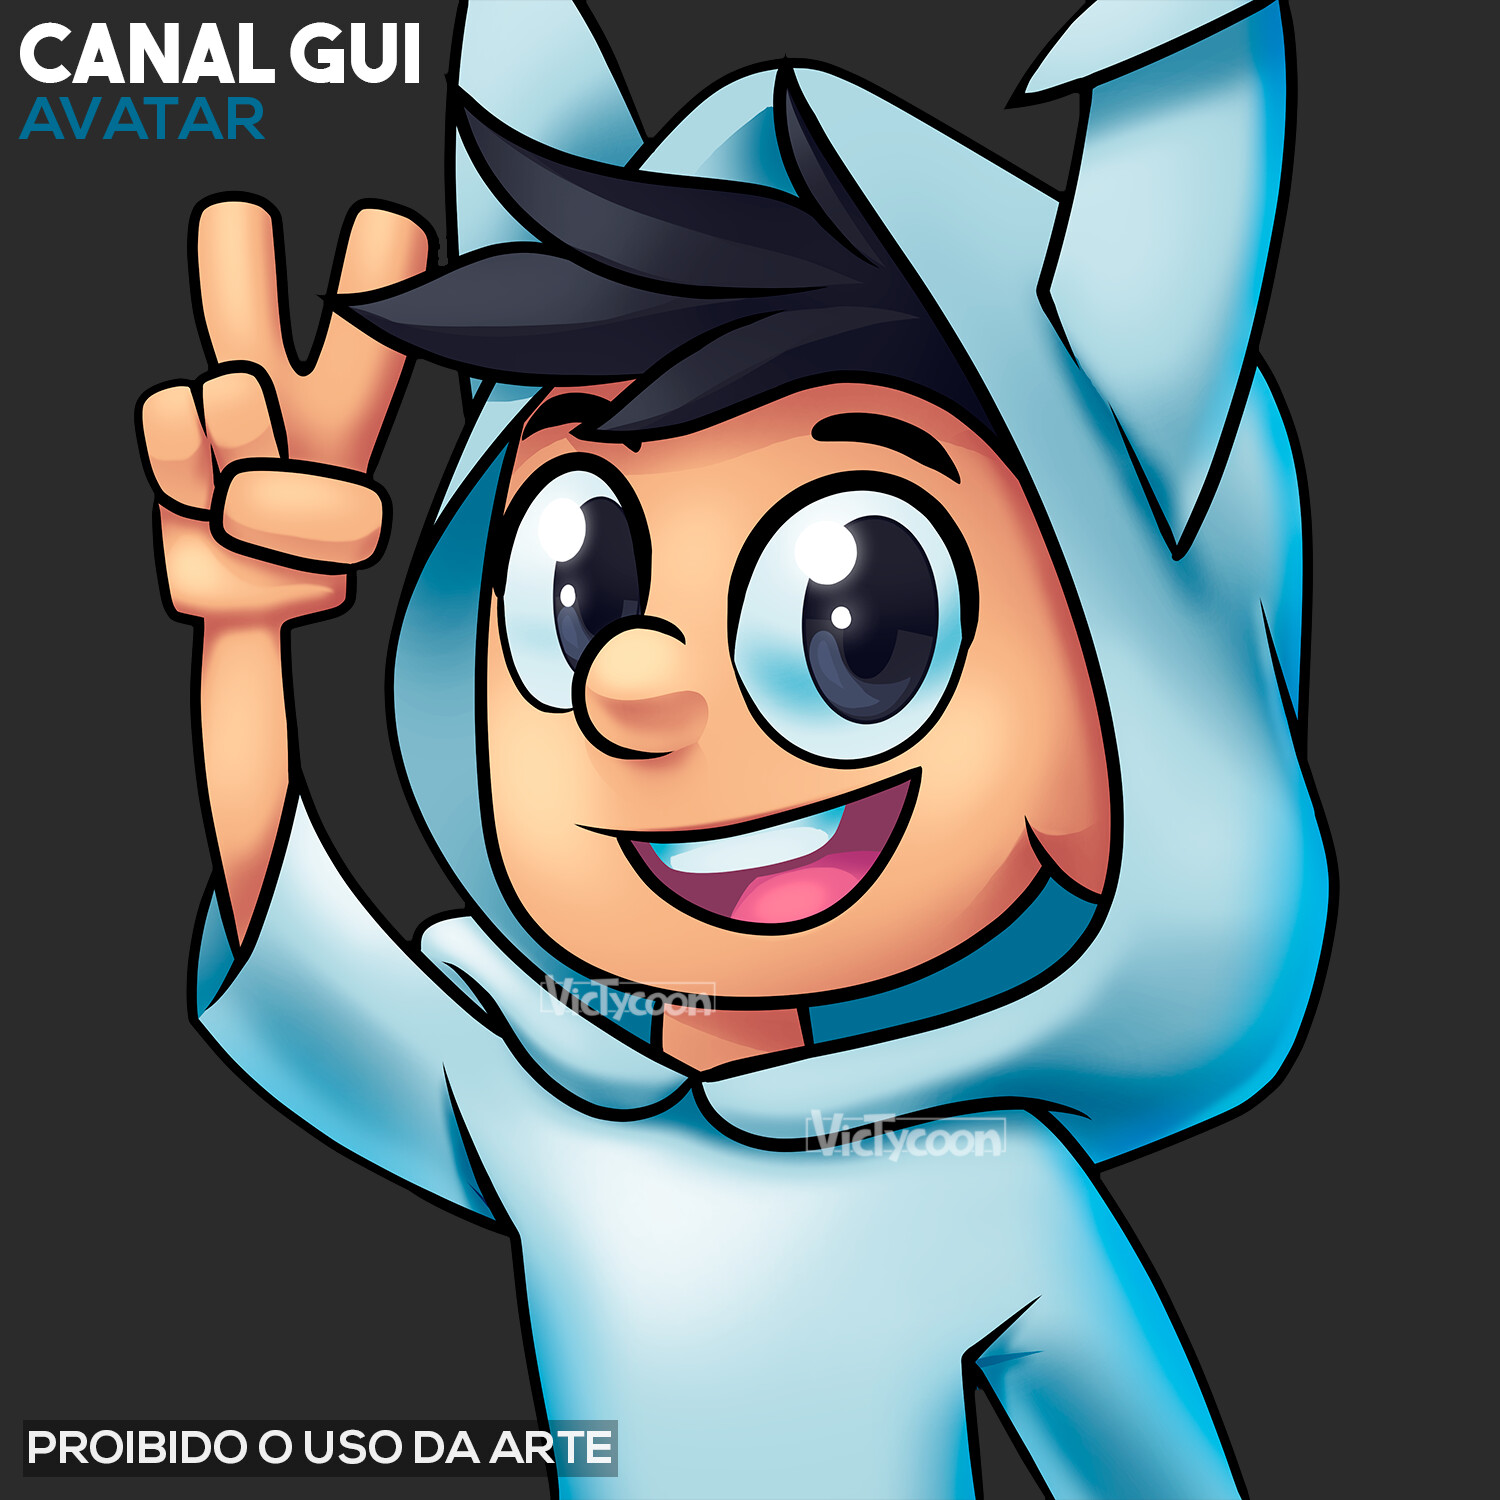 VicTycoon Art - AVATAR - Canal Guii